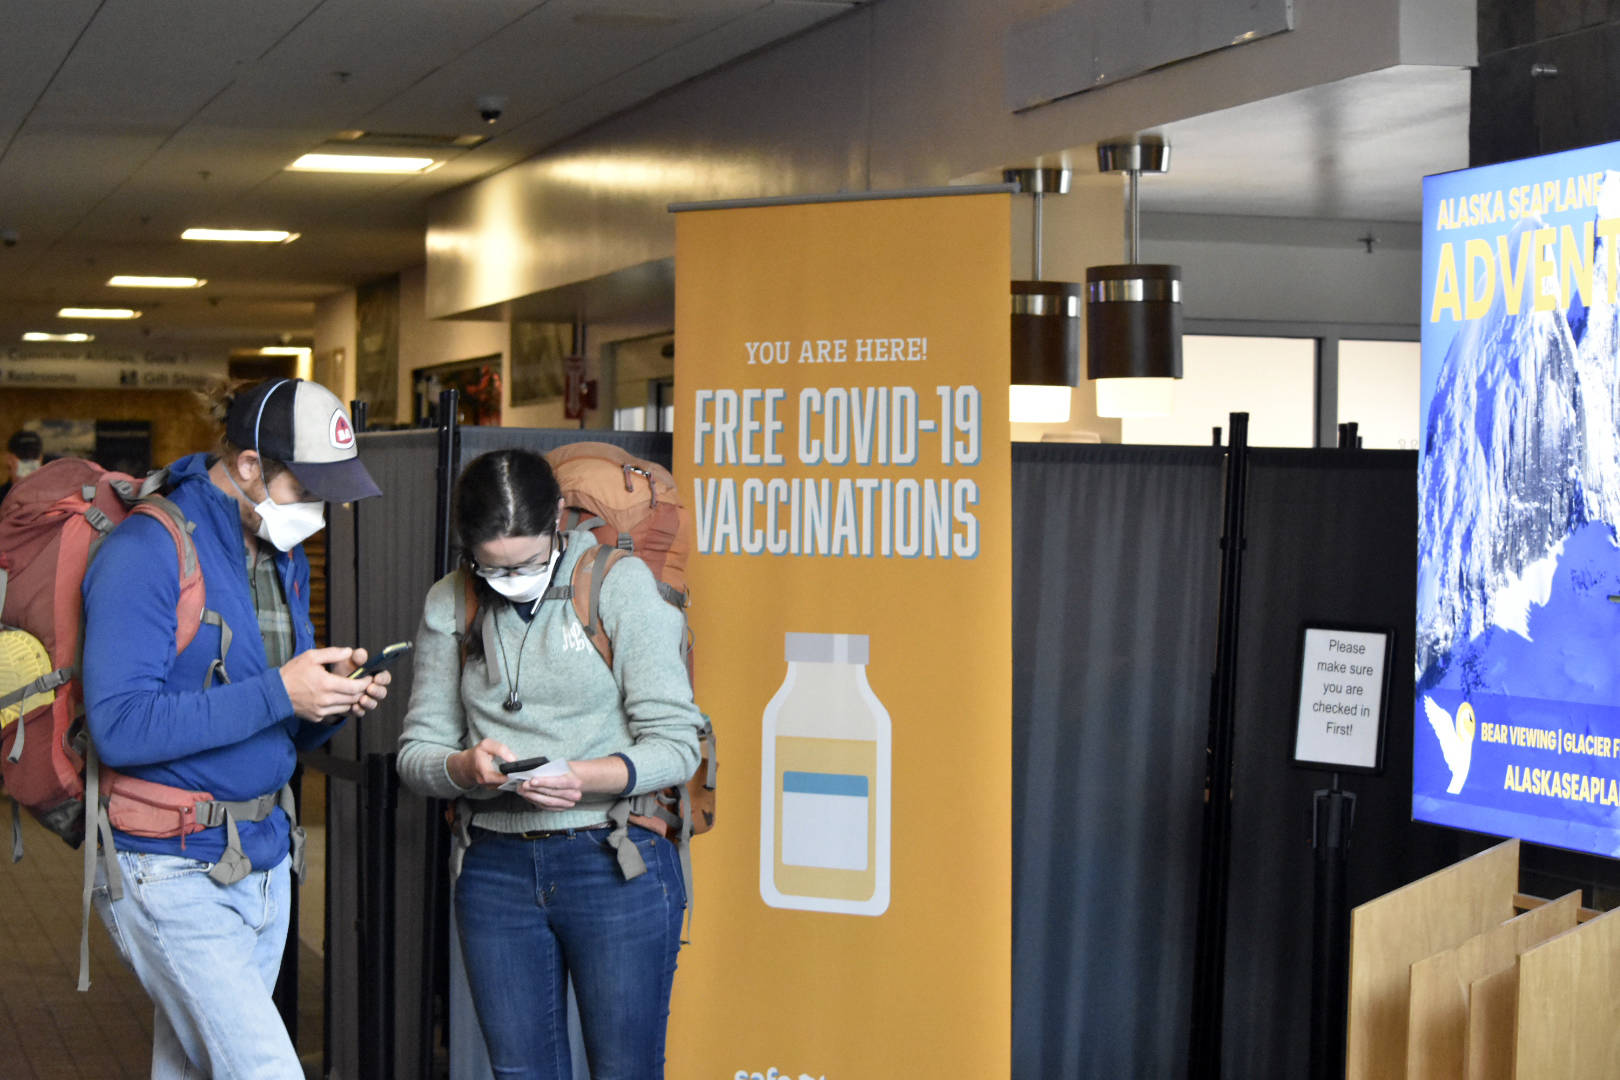 Travelers check their cellphones near a sign promoting COVID-19 vaccinations in the Juneau International Airport on Thursday. Federal officials are recommending a booster shot for the COVID-19 vaccine, and local health authorities say the rollout will likely be similar to the initial vaccine distribution. (Peter Segall / Juneau Empire)